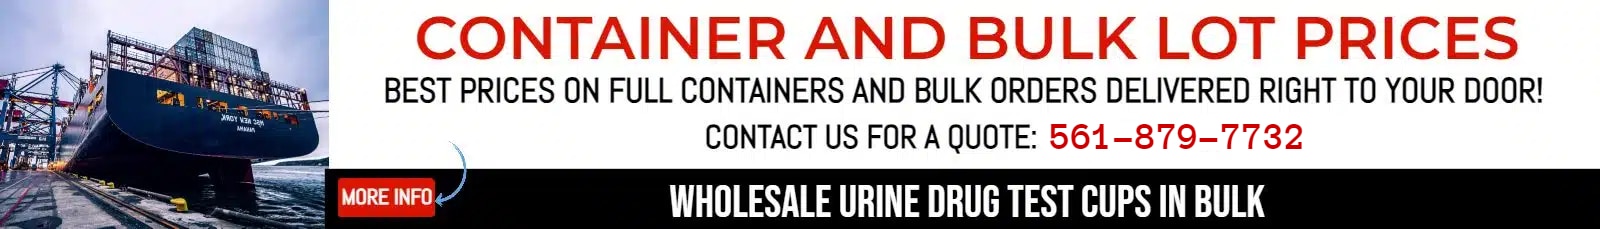 12PANELNOW.COM CONTAINER AND BULK PRICES